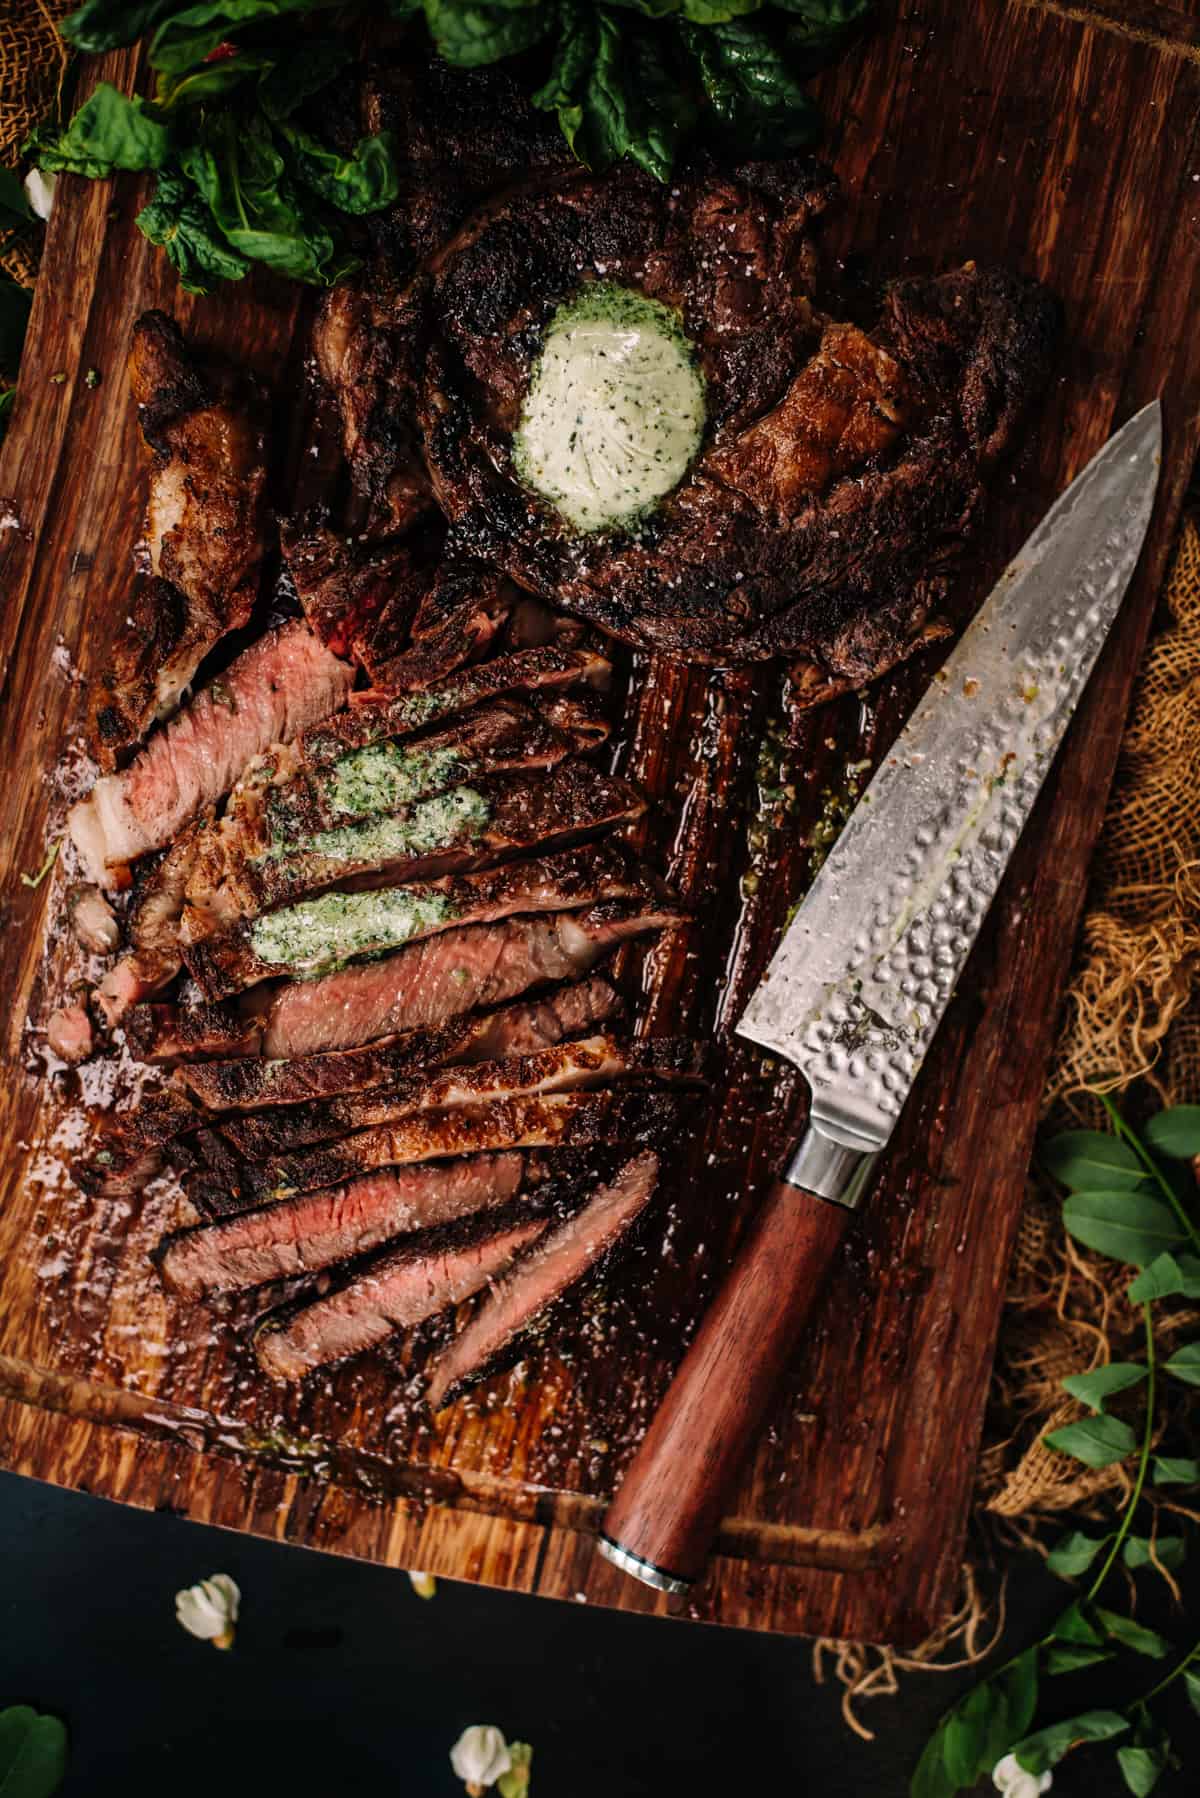 A steak on a cutting board with herbs and a knife.